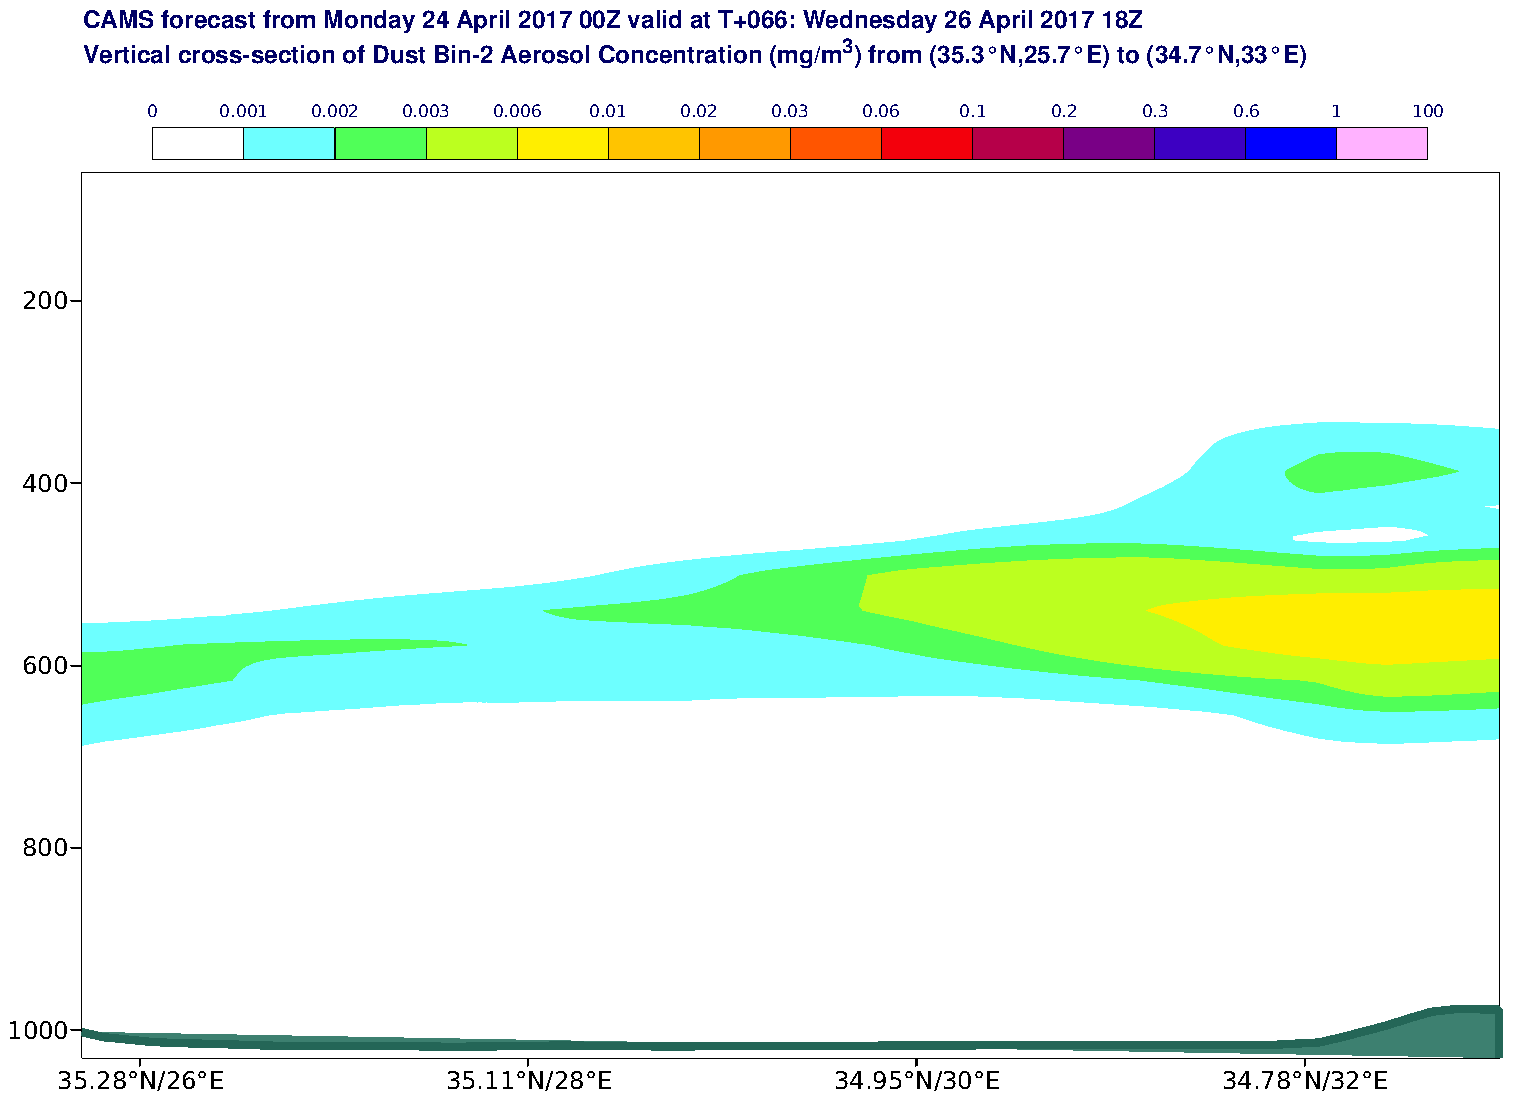 Vertical cross-section of Dust Bin-2 Aerosol Concentration (mg/m3) valid at T66 - 2017-04-26 18:00